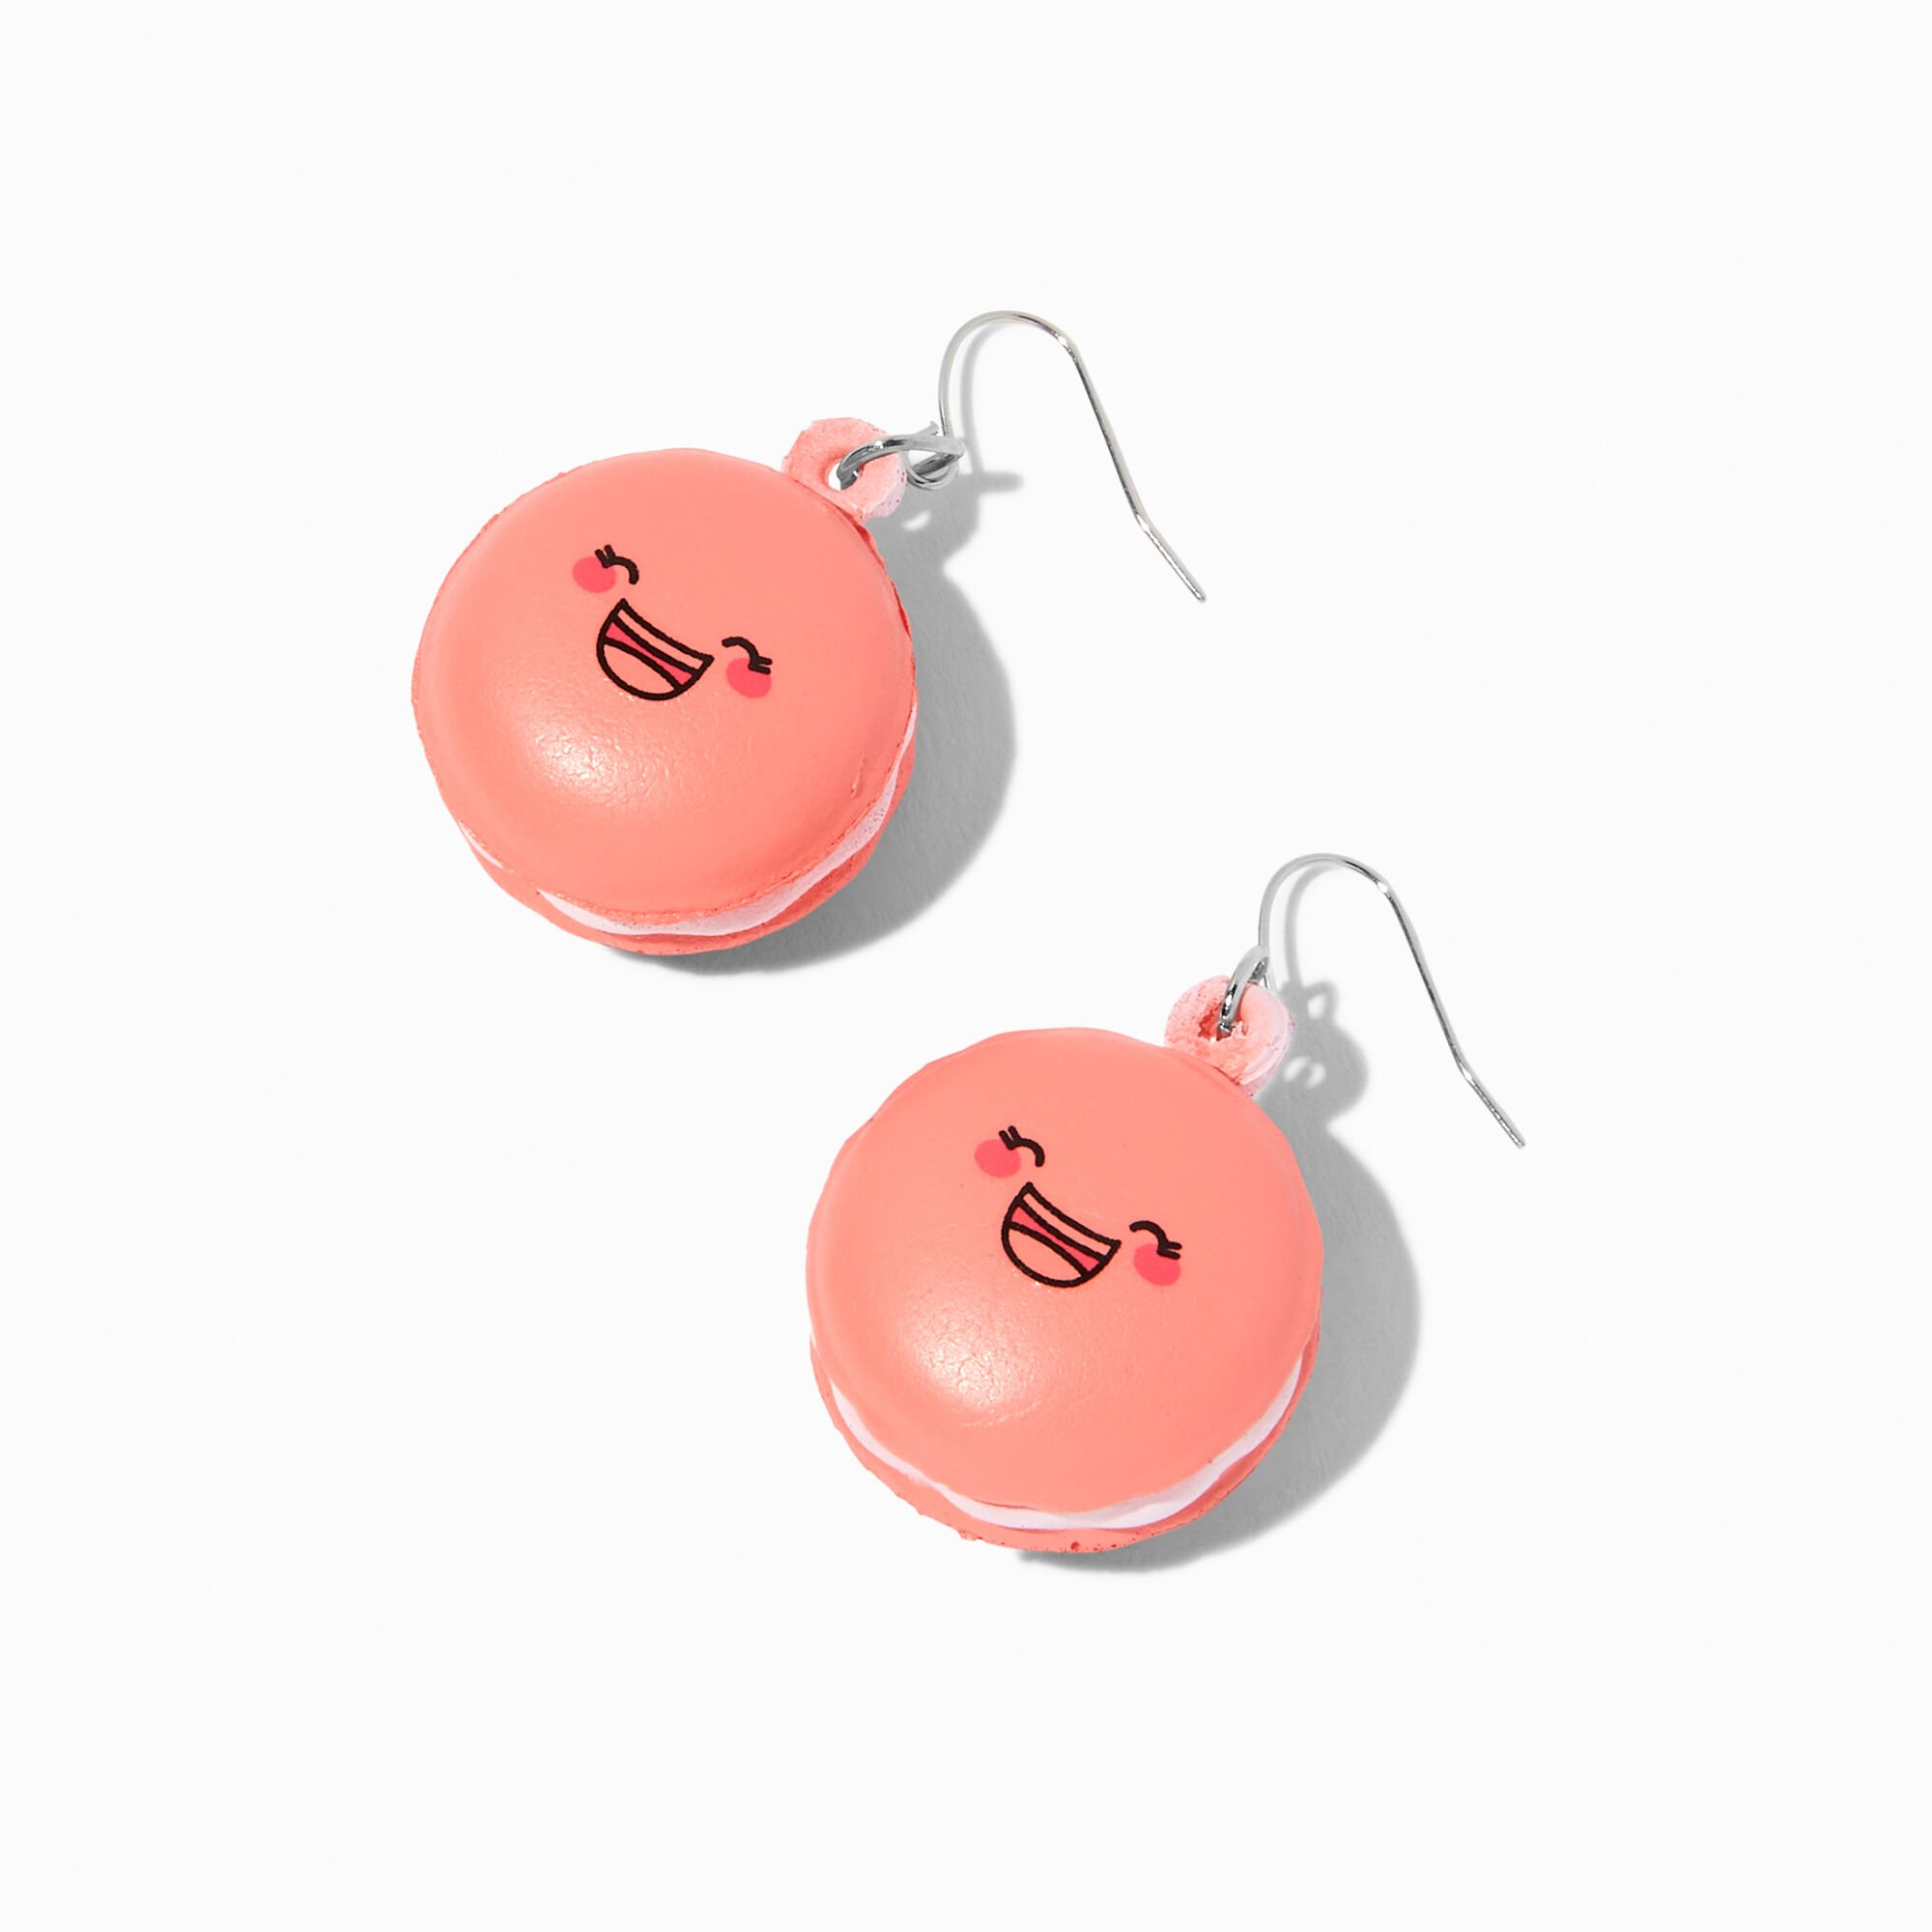 View Claires Squish Happy Face Macaron 1 Drop Earrings Pink information